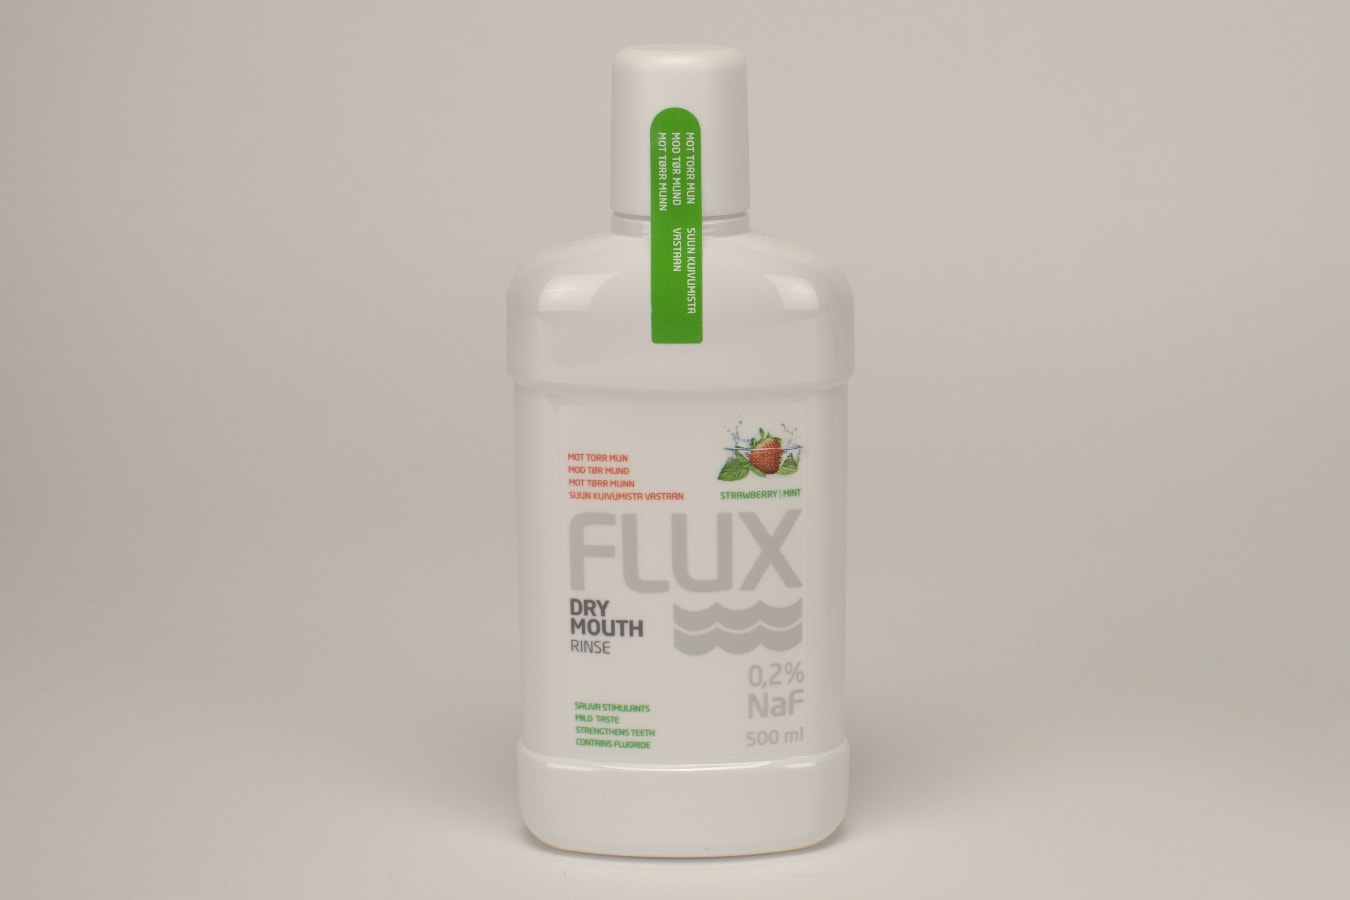 Flux Dry Mouth Rinse 0,2% NaF 500ml